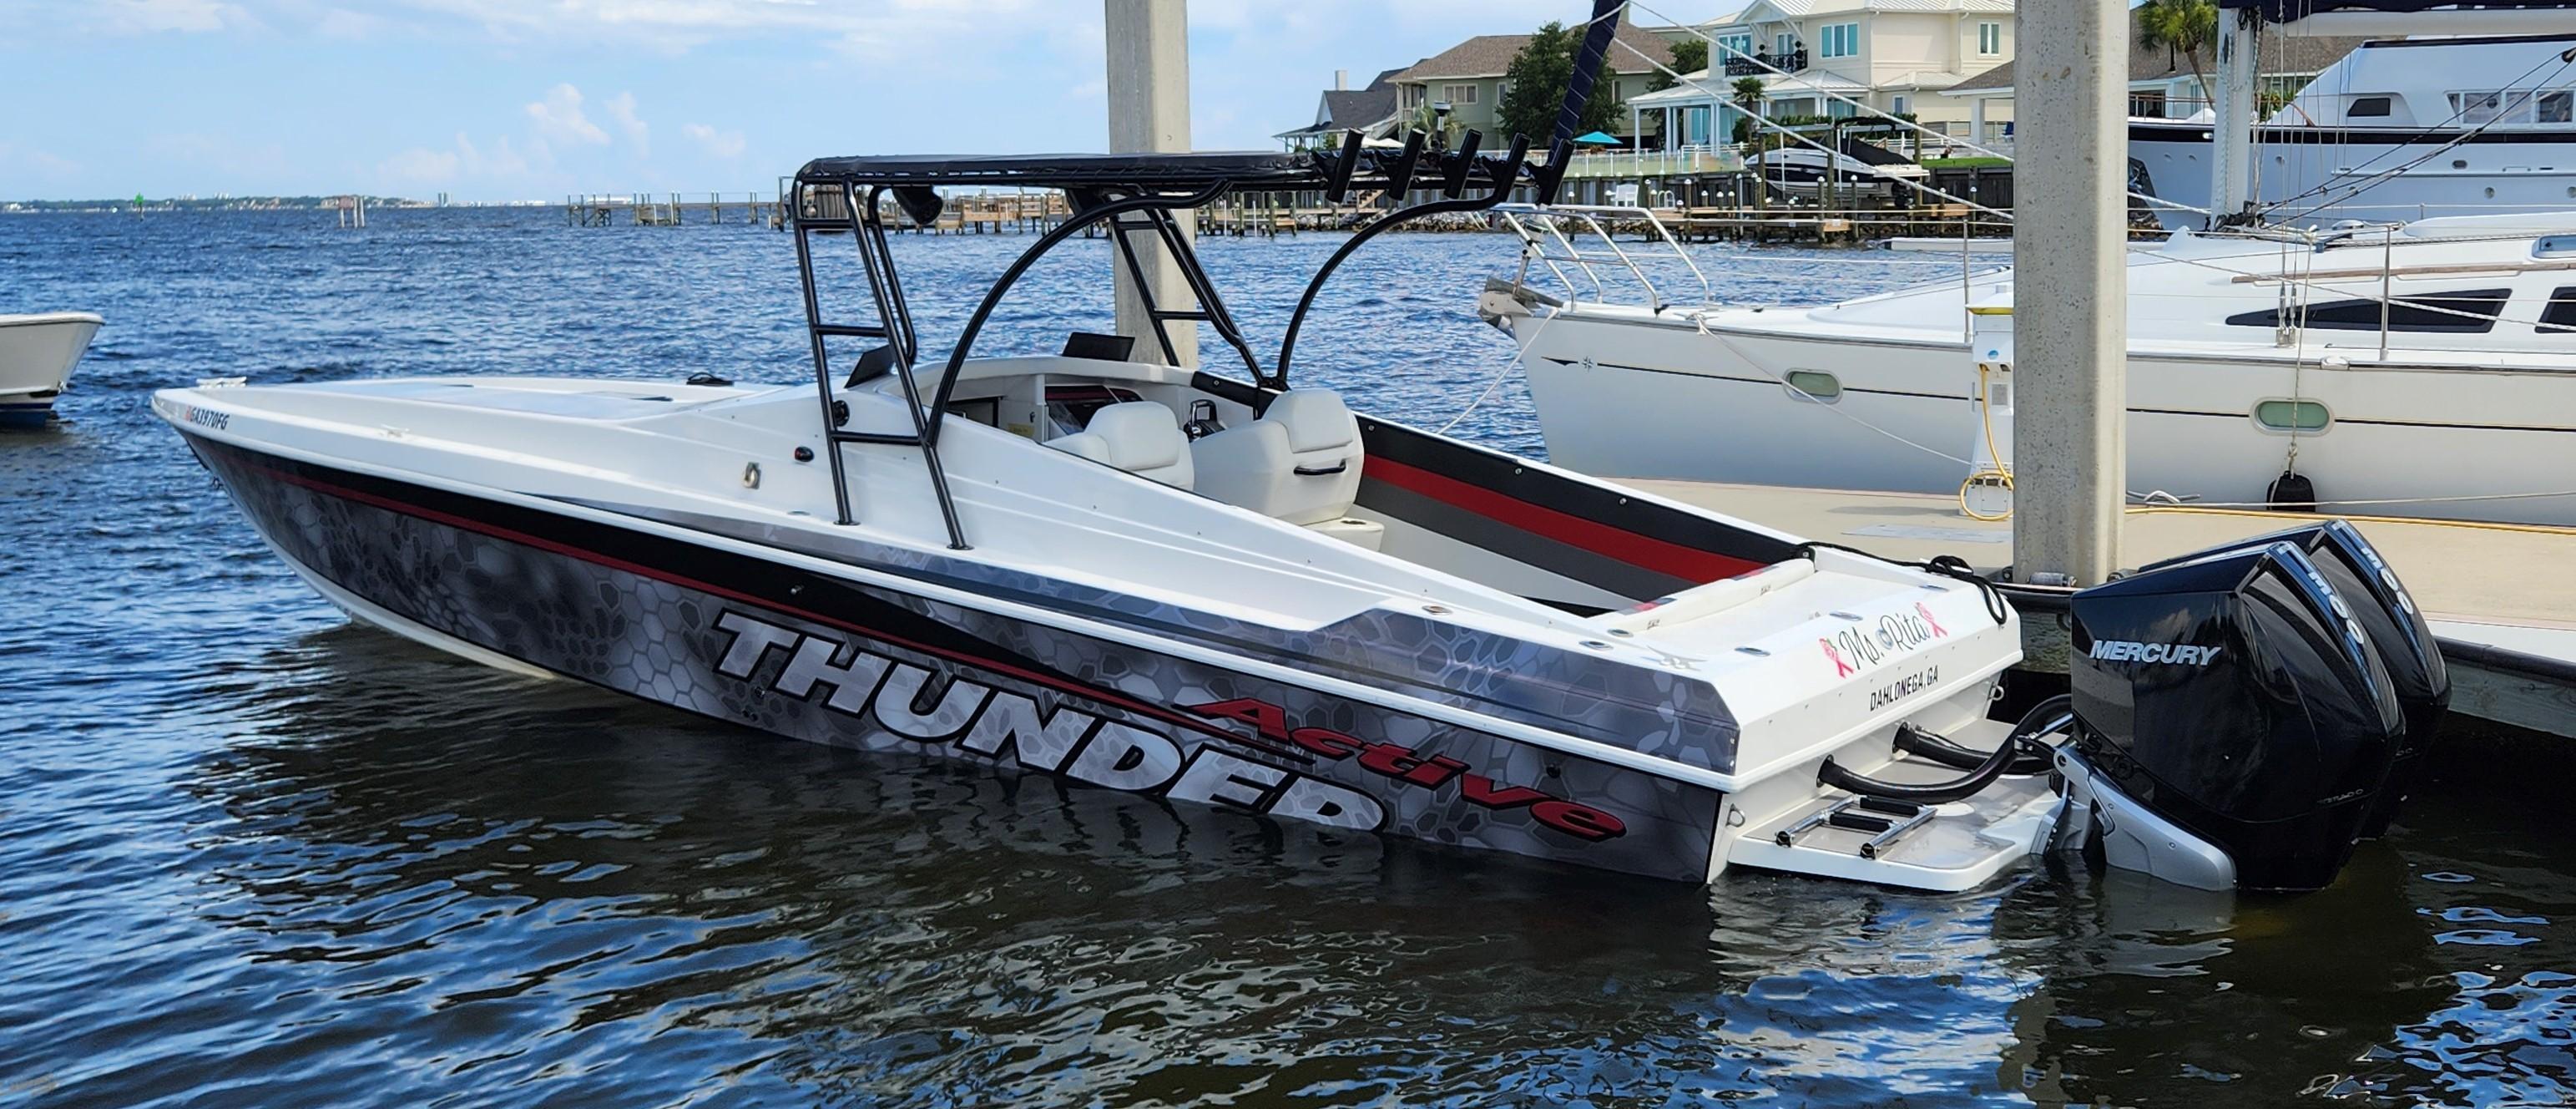 Blackwater boats for sale in Florida - Boat Trader